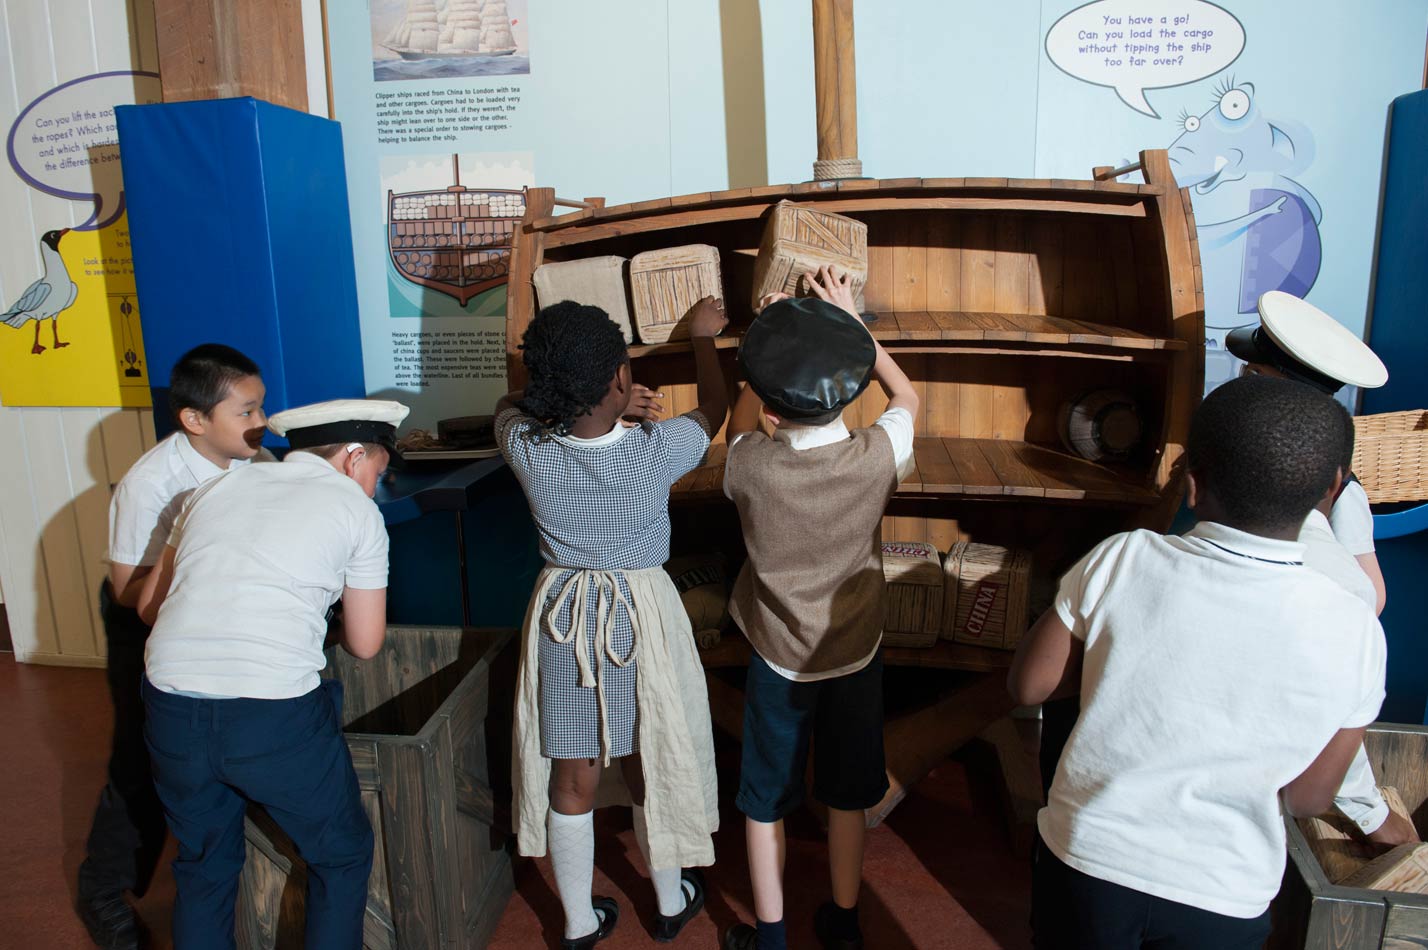 Children visiting the Mudlarks gallery play with the Tip the Clipper interactive.